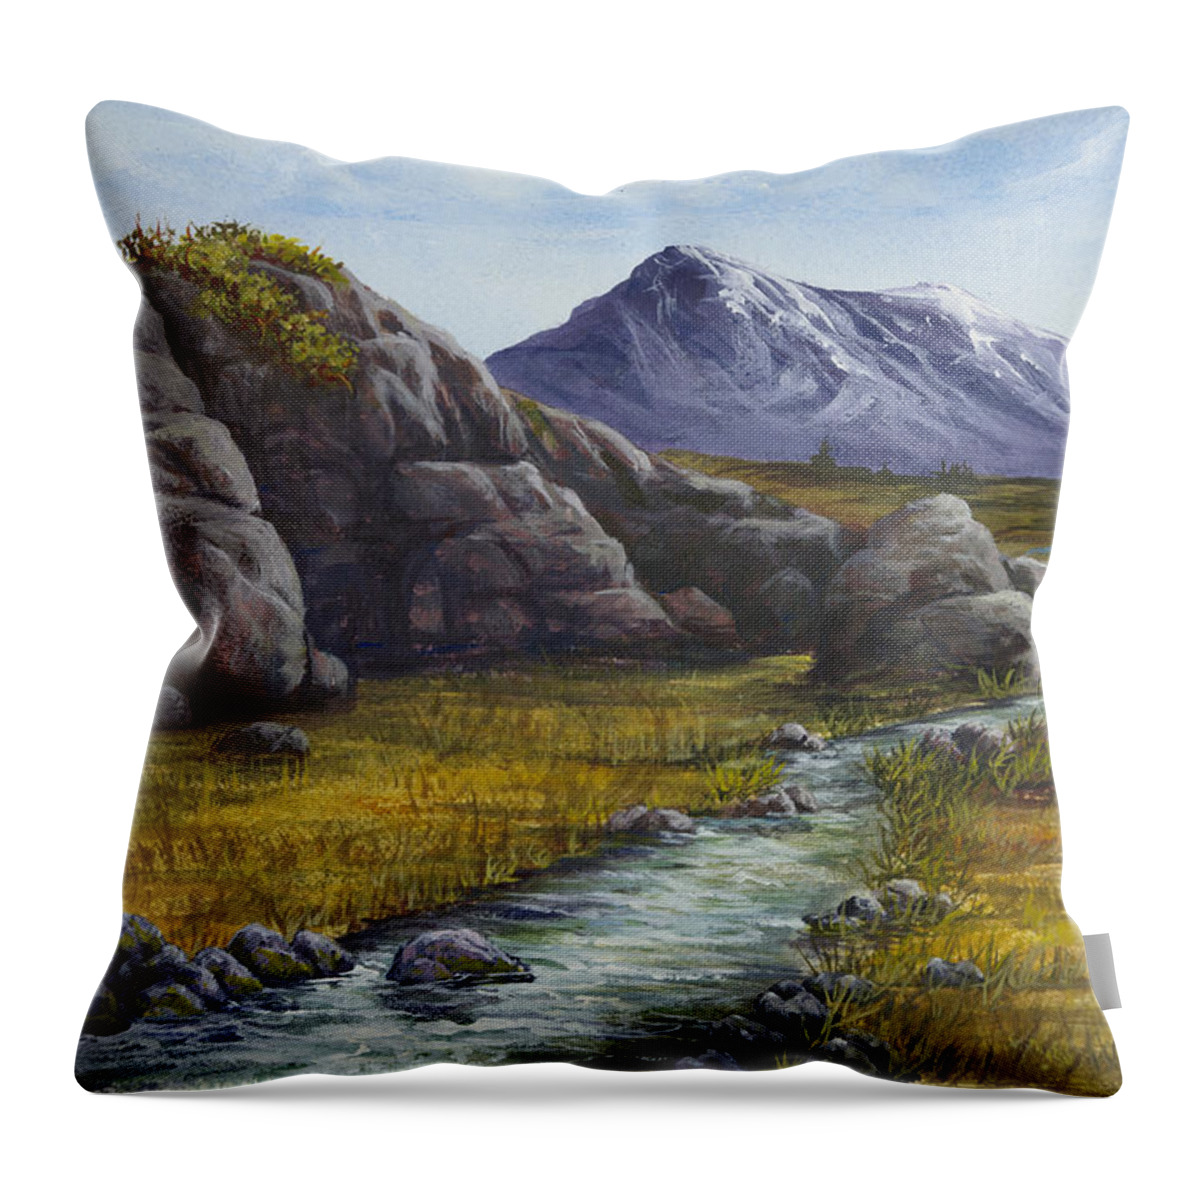 Landscape Throw Pillow featuring the painting Mountain Stream by Darice Machel McGuire